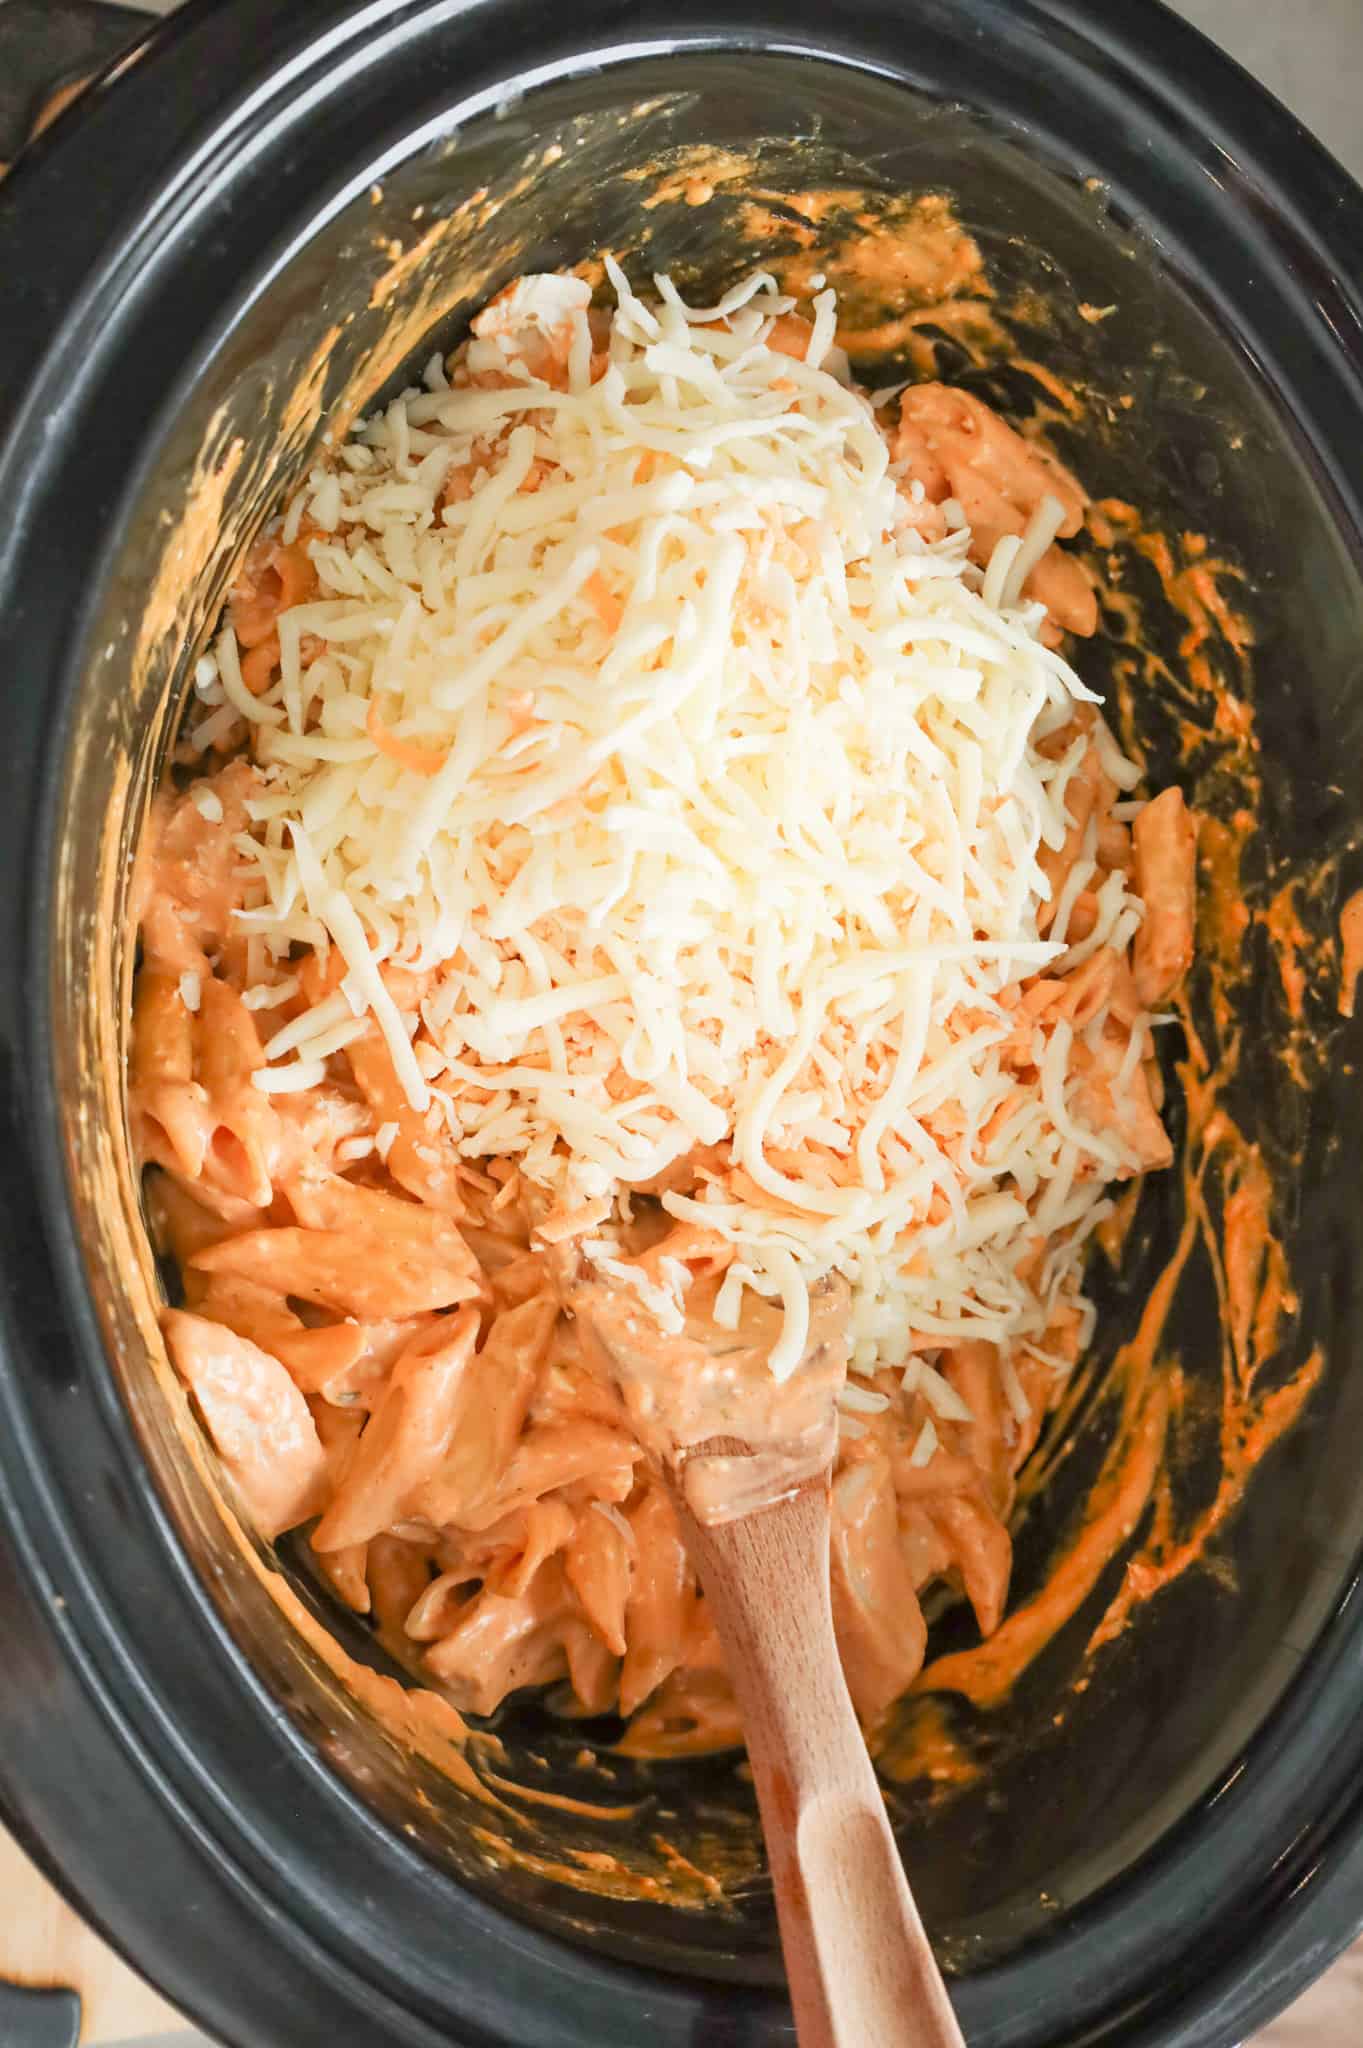 shredded cheese added to crock pot with Buffalo chicken pasta